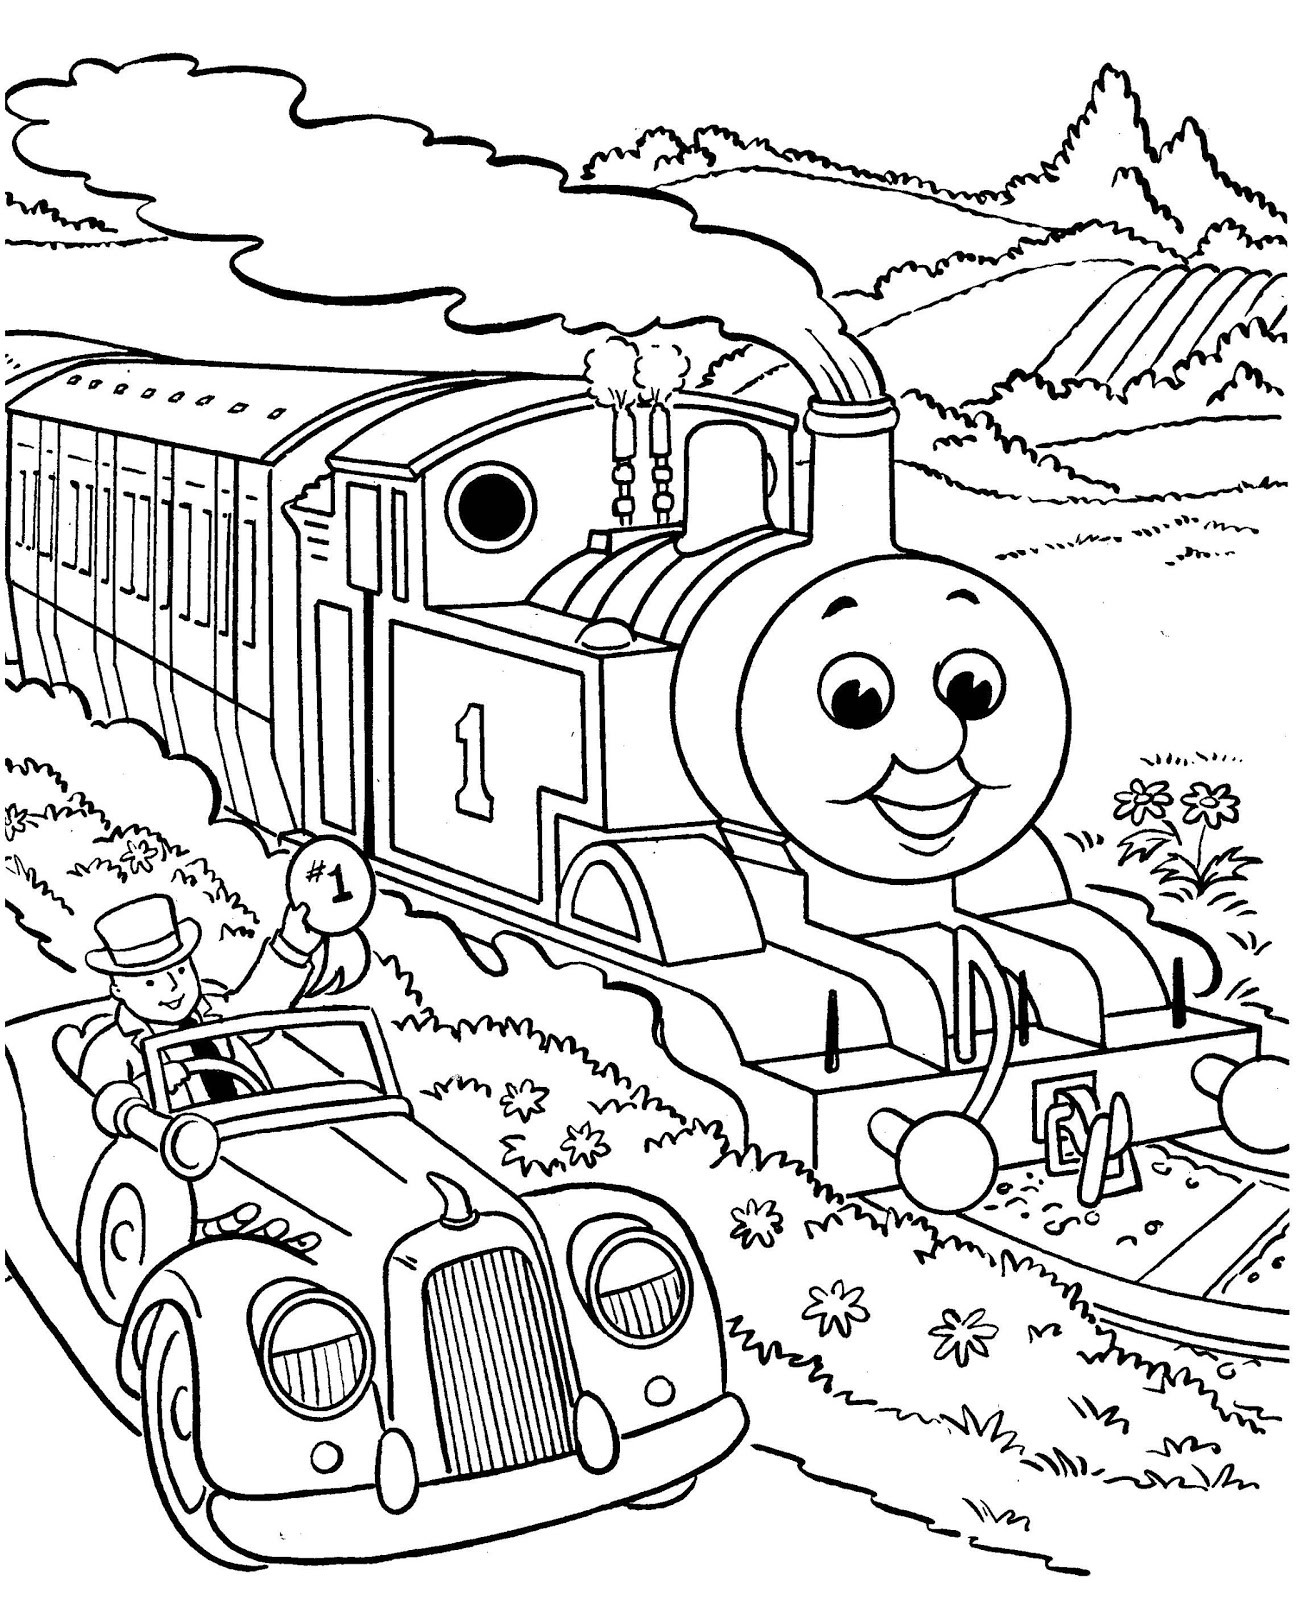 Thomas The Train Printable Coloring Pages
 Mom s Daily Adventures Printable Coloring Pages